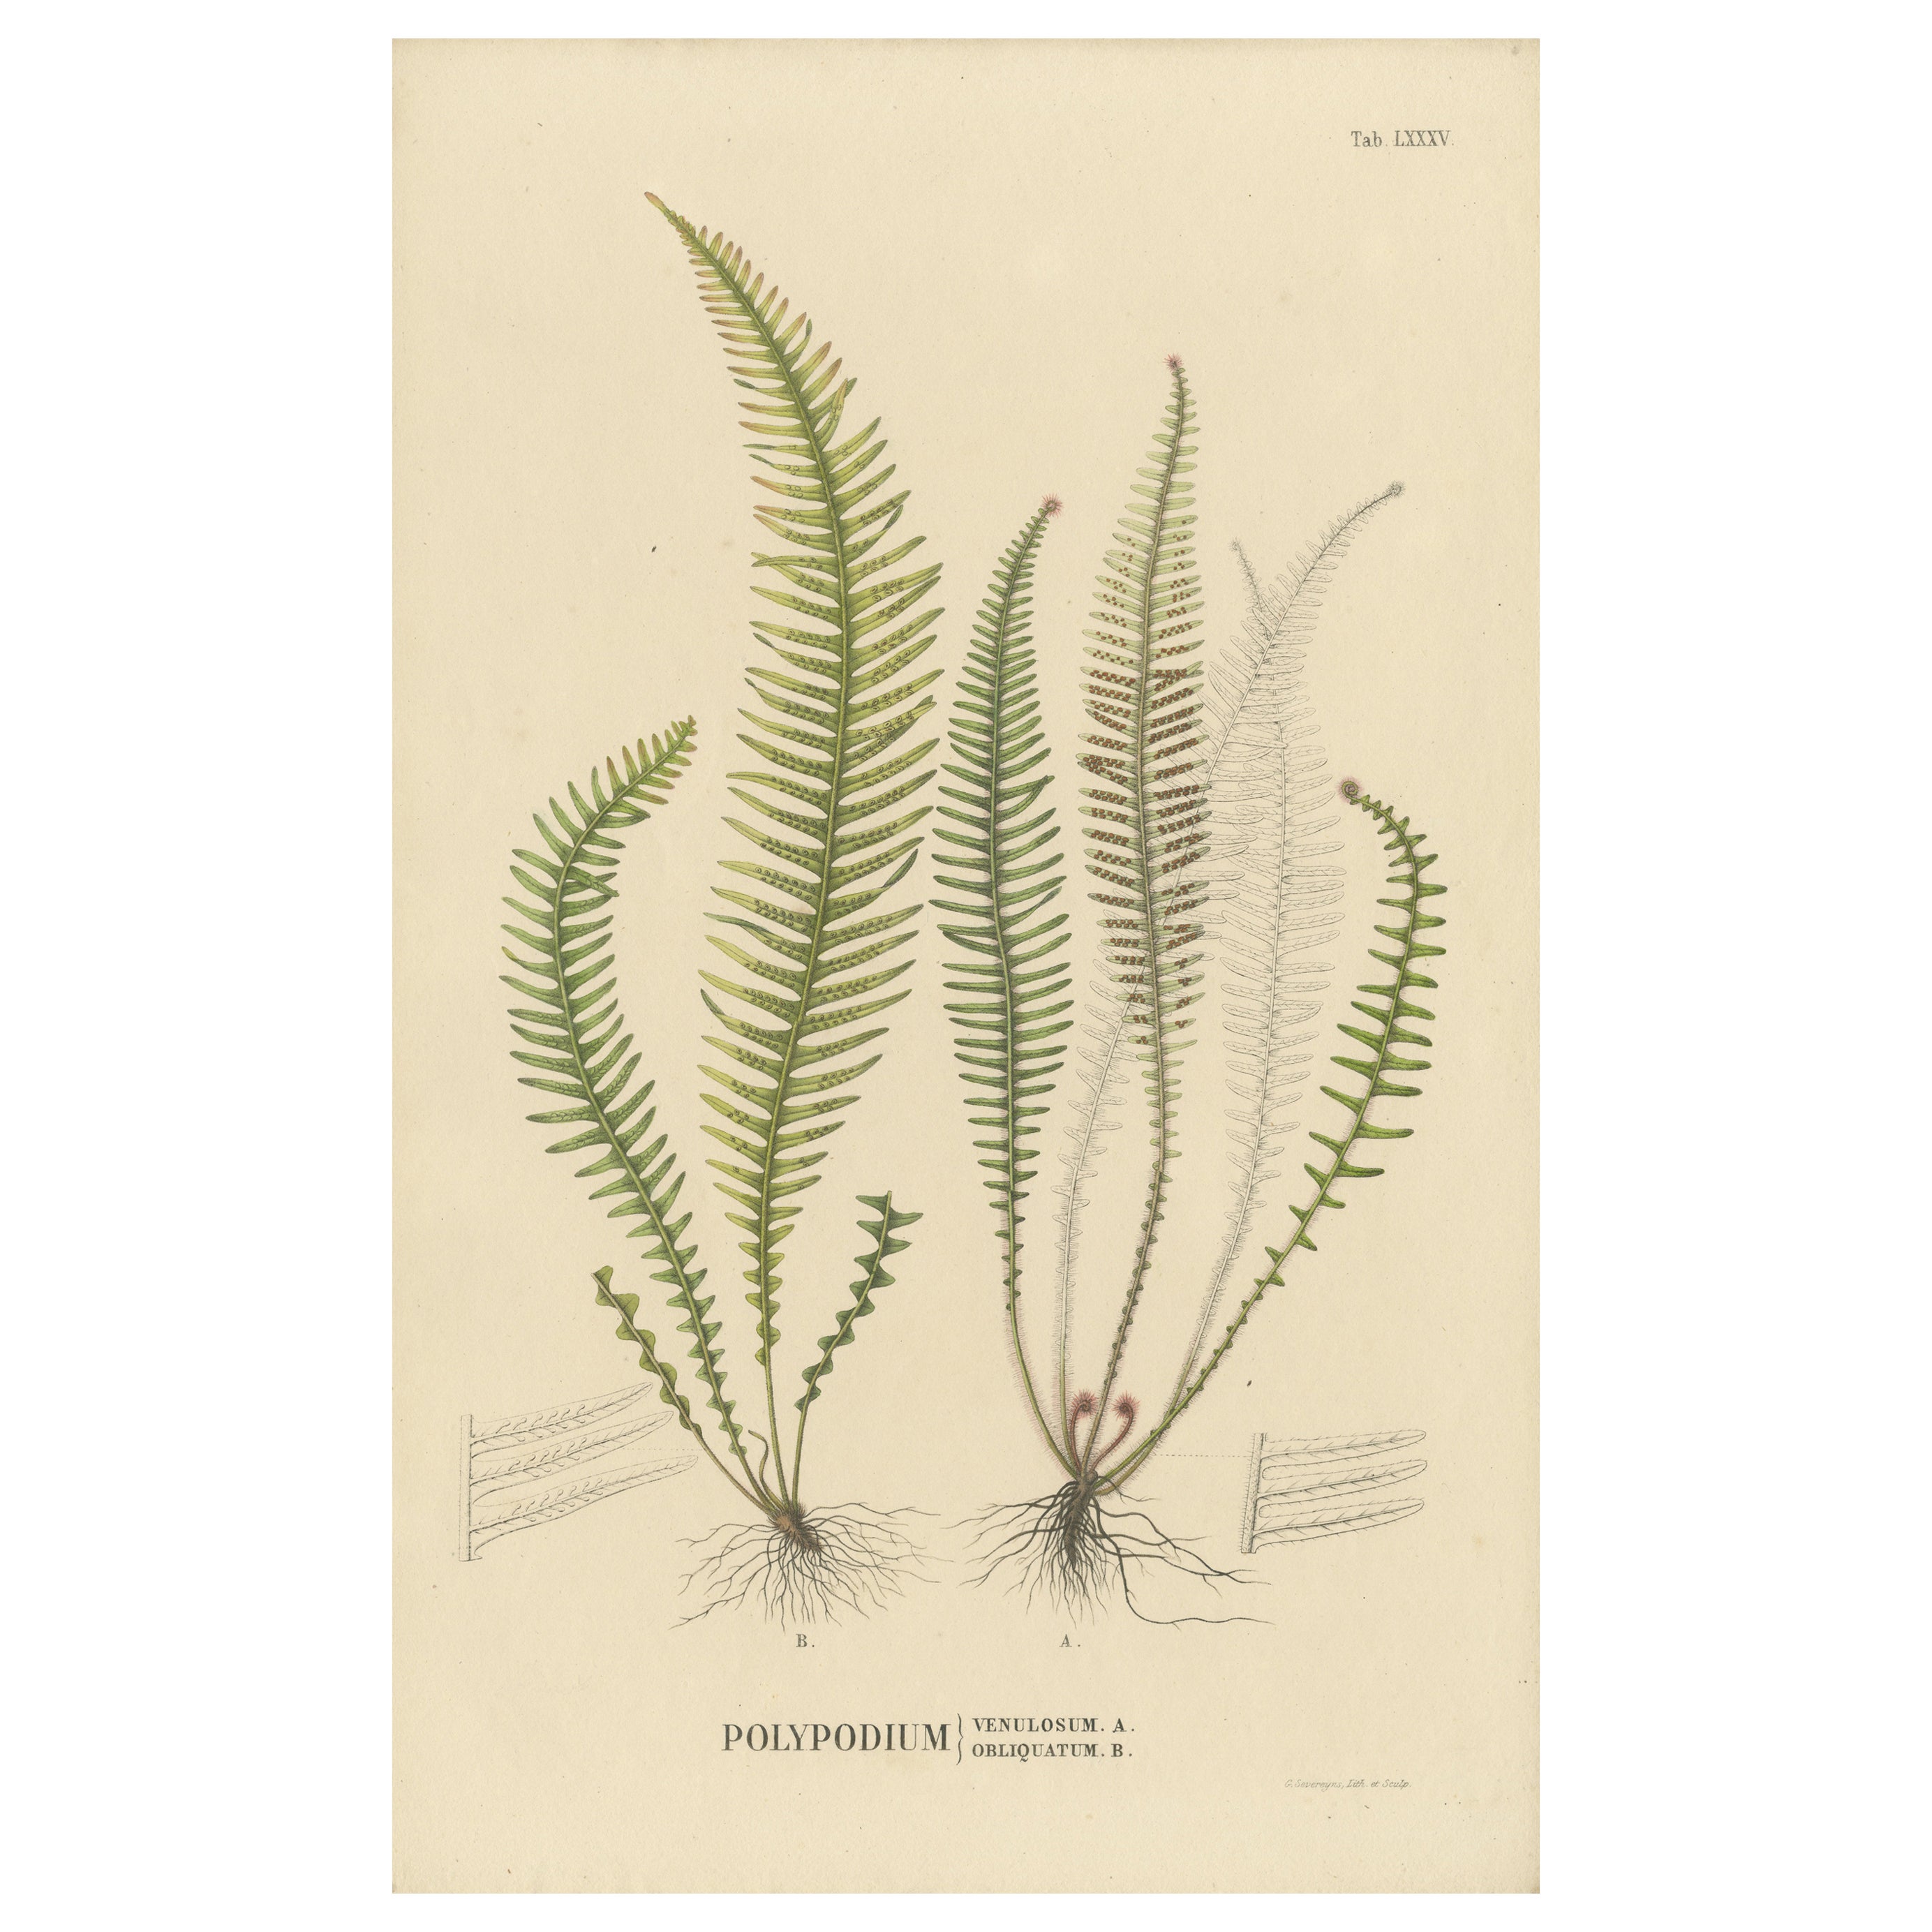 Beautifully Handcolored Lithograph of Ferns of Indonesia 'Polypodium', 1829